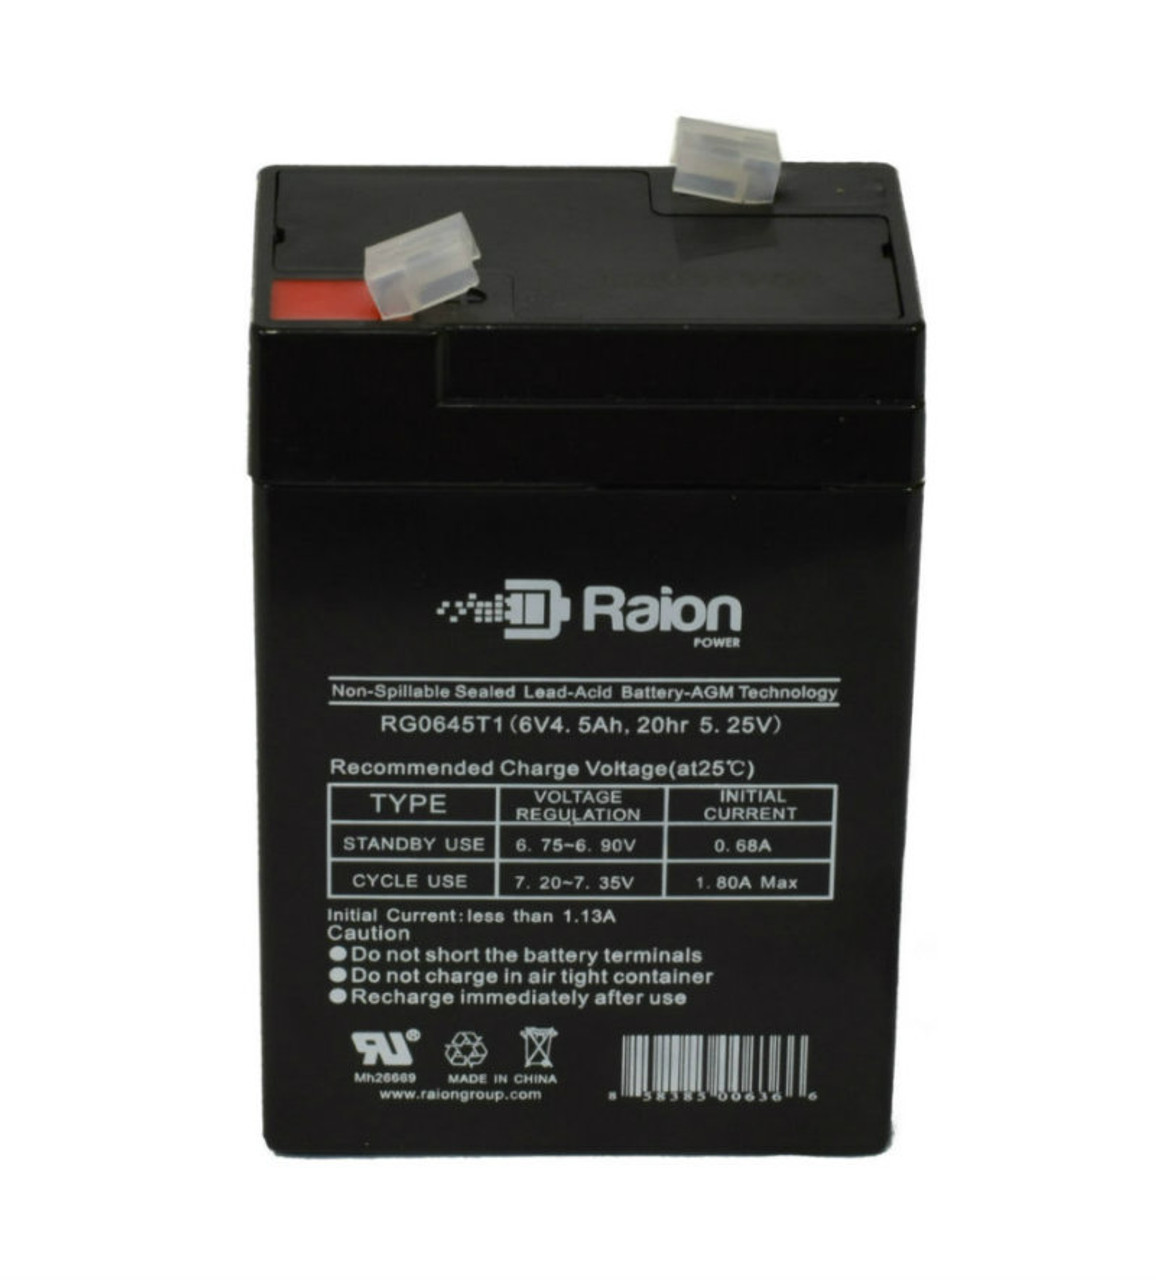 Raion Power RG0645T1 Replacement Battery Cartridge for Vision CP642